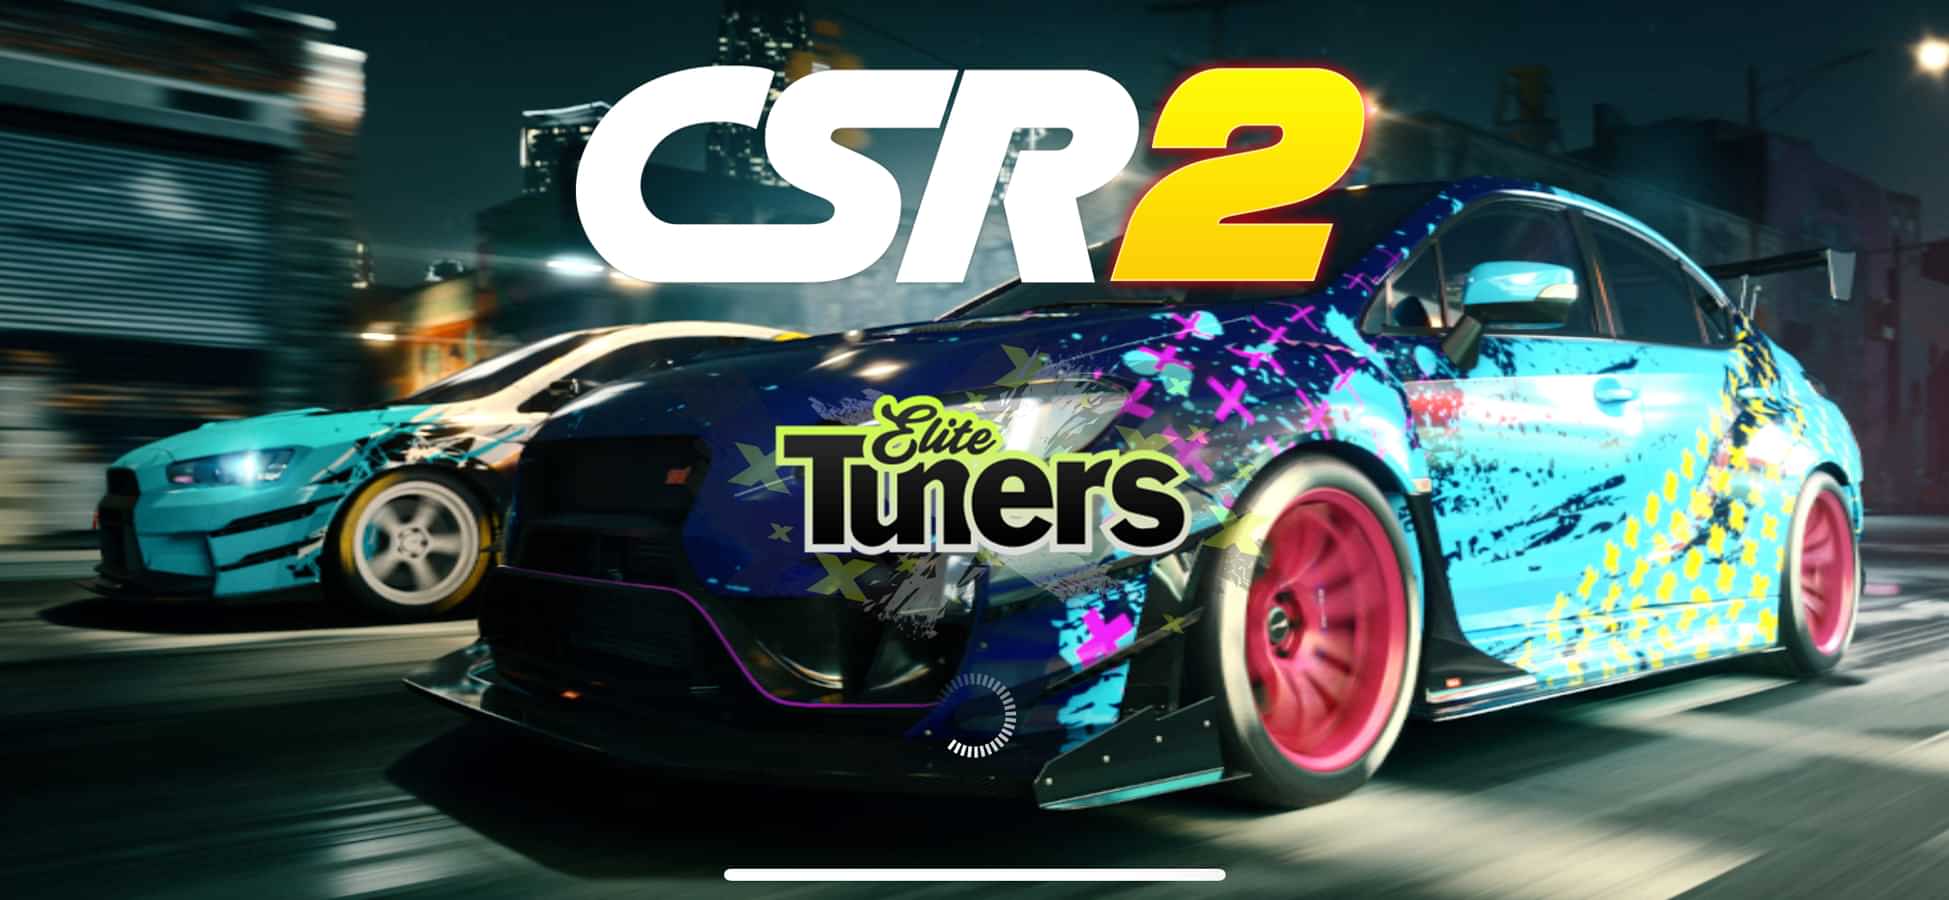 What is the best Phone for playing CSR2 in 2021